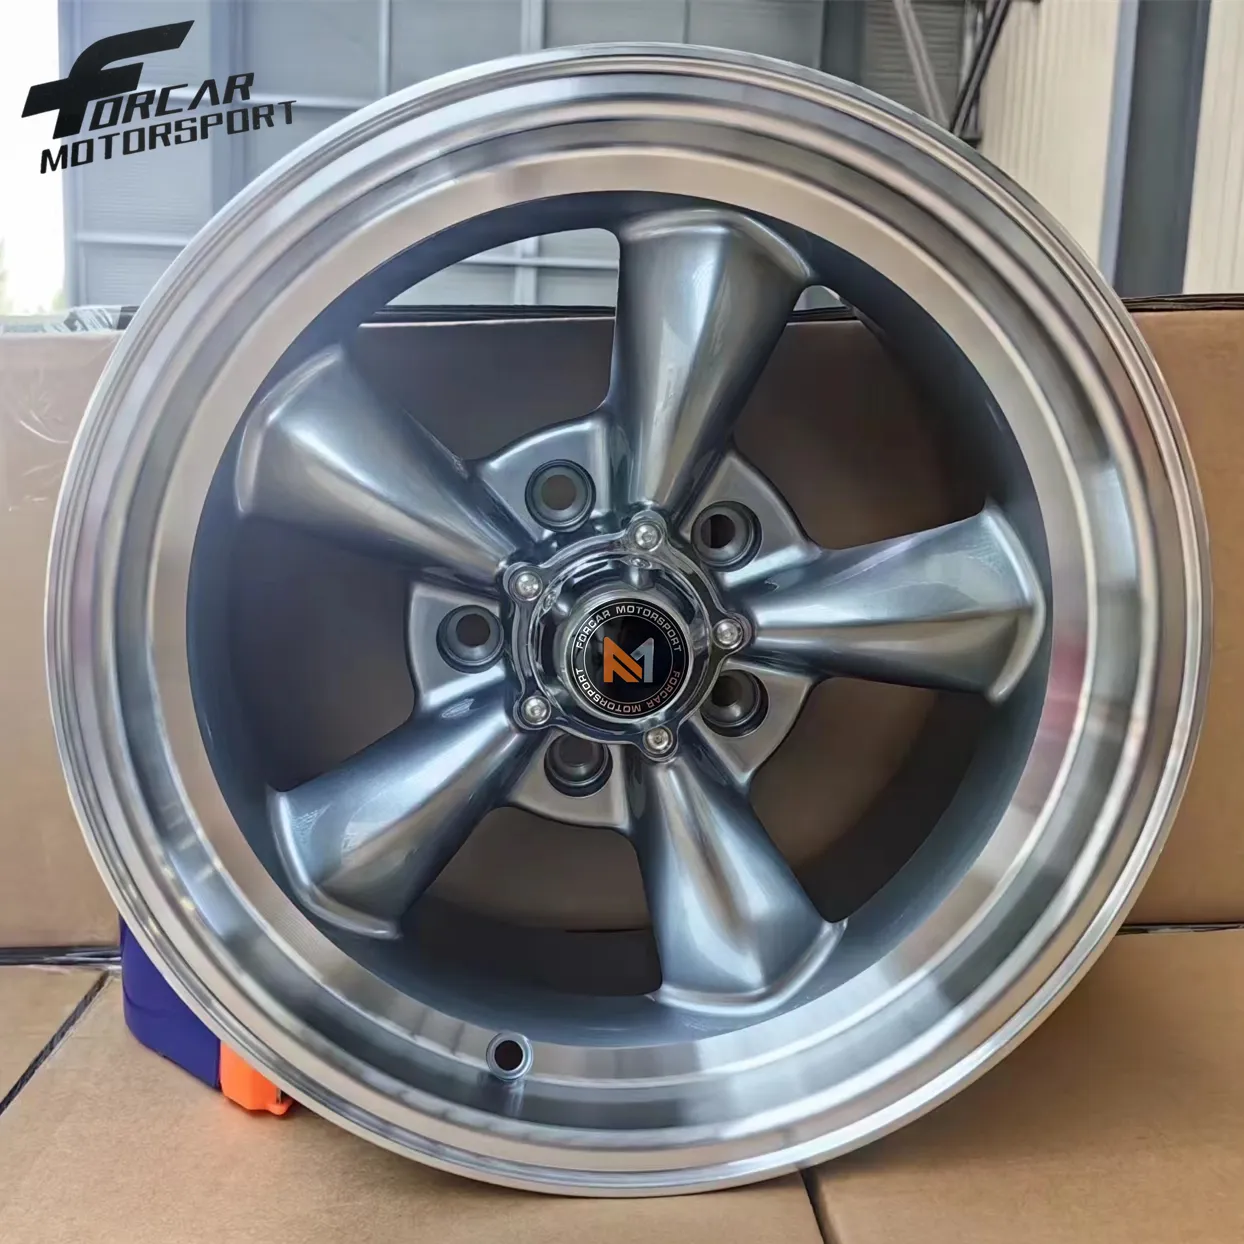 15 17 18 inch front rear aftermarket American wheel design 5x114.3 5x127 racing car alloy rims